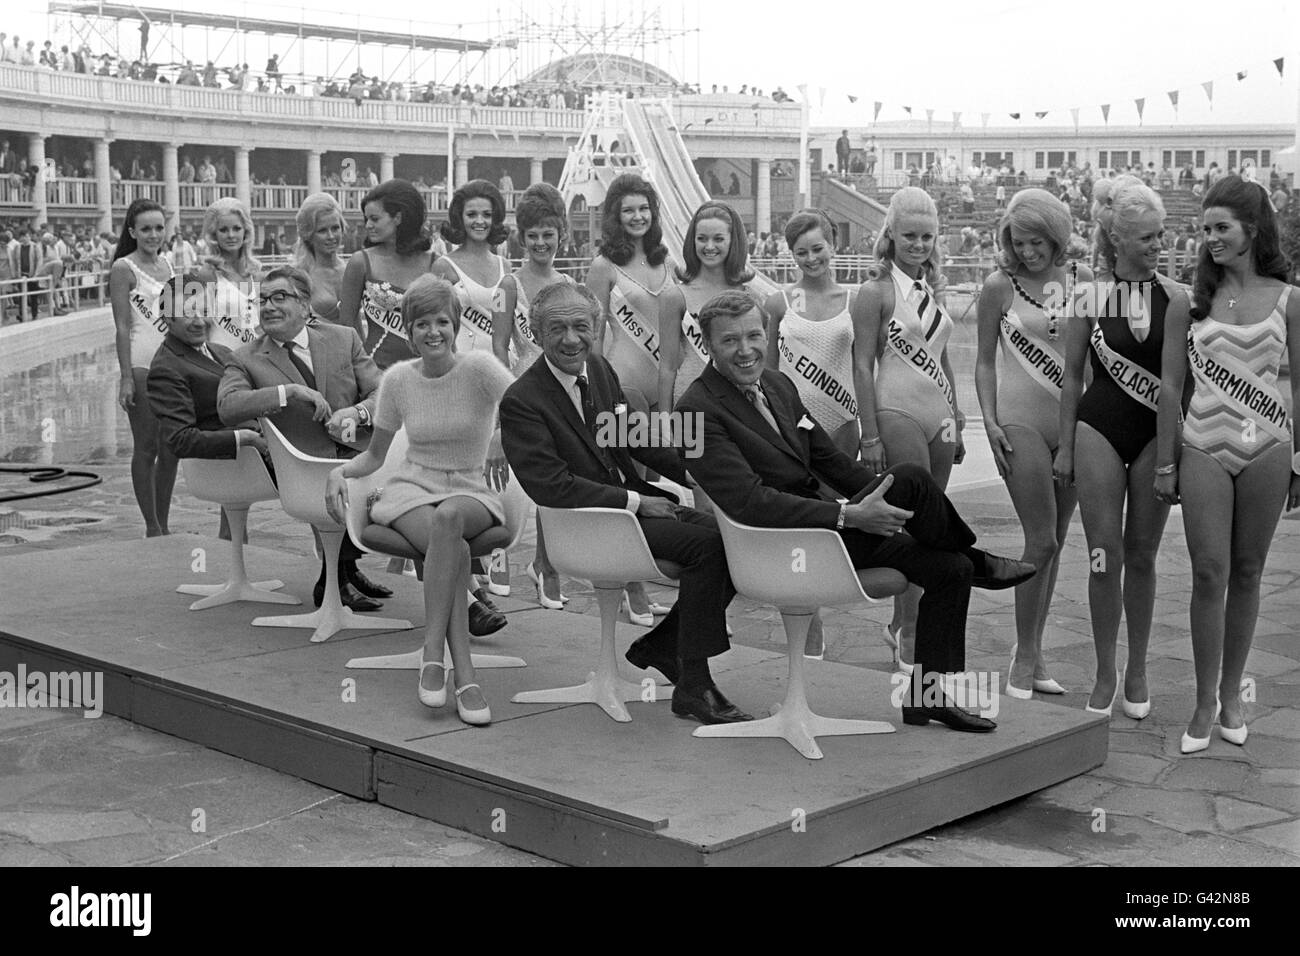 Thirteen girls lined up at Blackpool and one of them will be crowned Miss UK. The judges for this beauty pageant are seated in front of the girls; from the left - Eric Morley, Harry Worth, Cilla Black, Sid James and Val Doonican. Stock Photo